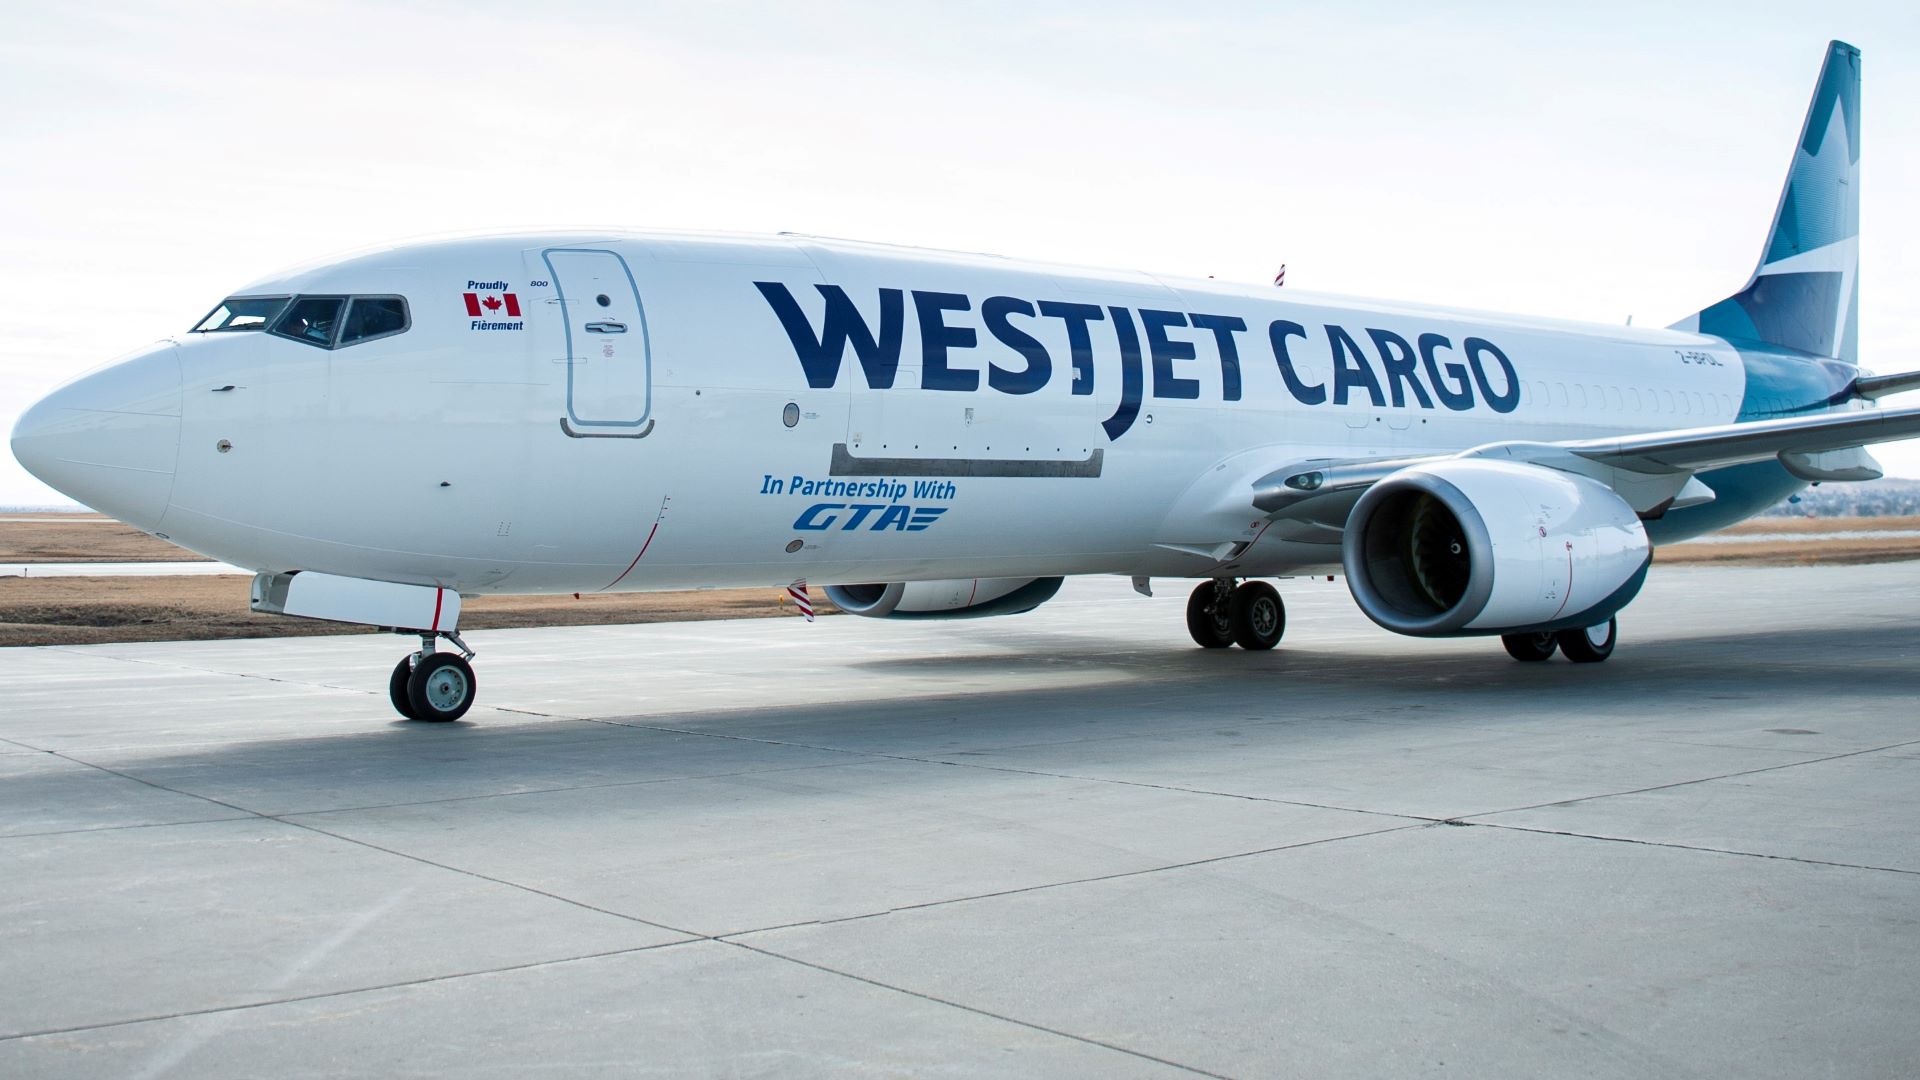 WestJet launching cargo division to meet demand for air freight amid  weakness in passenger travel - The Globe and Mail